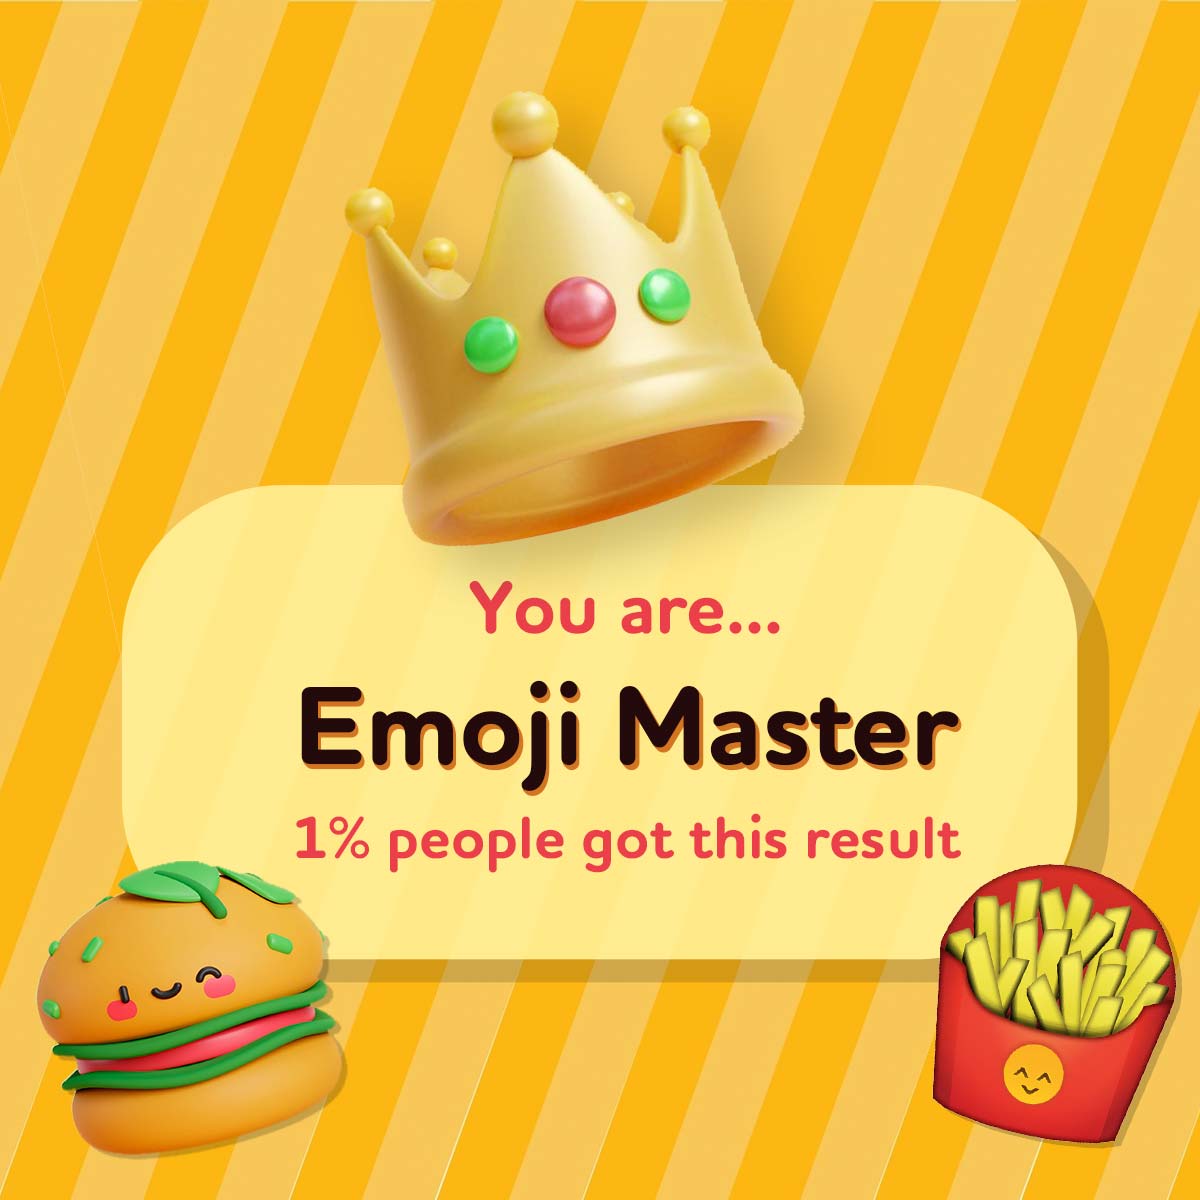 You got 22 out of 24! Only 1% Can Guess All the Fast Food Chains from Emojis Alone 🍔 🍟 🍕